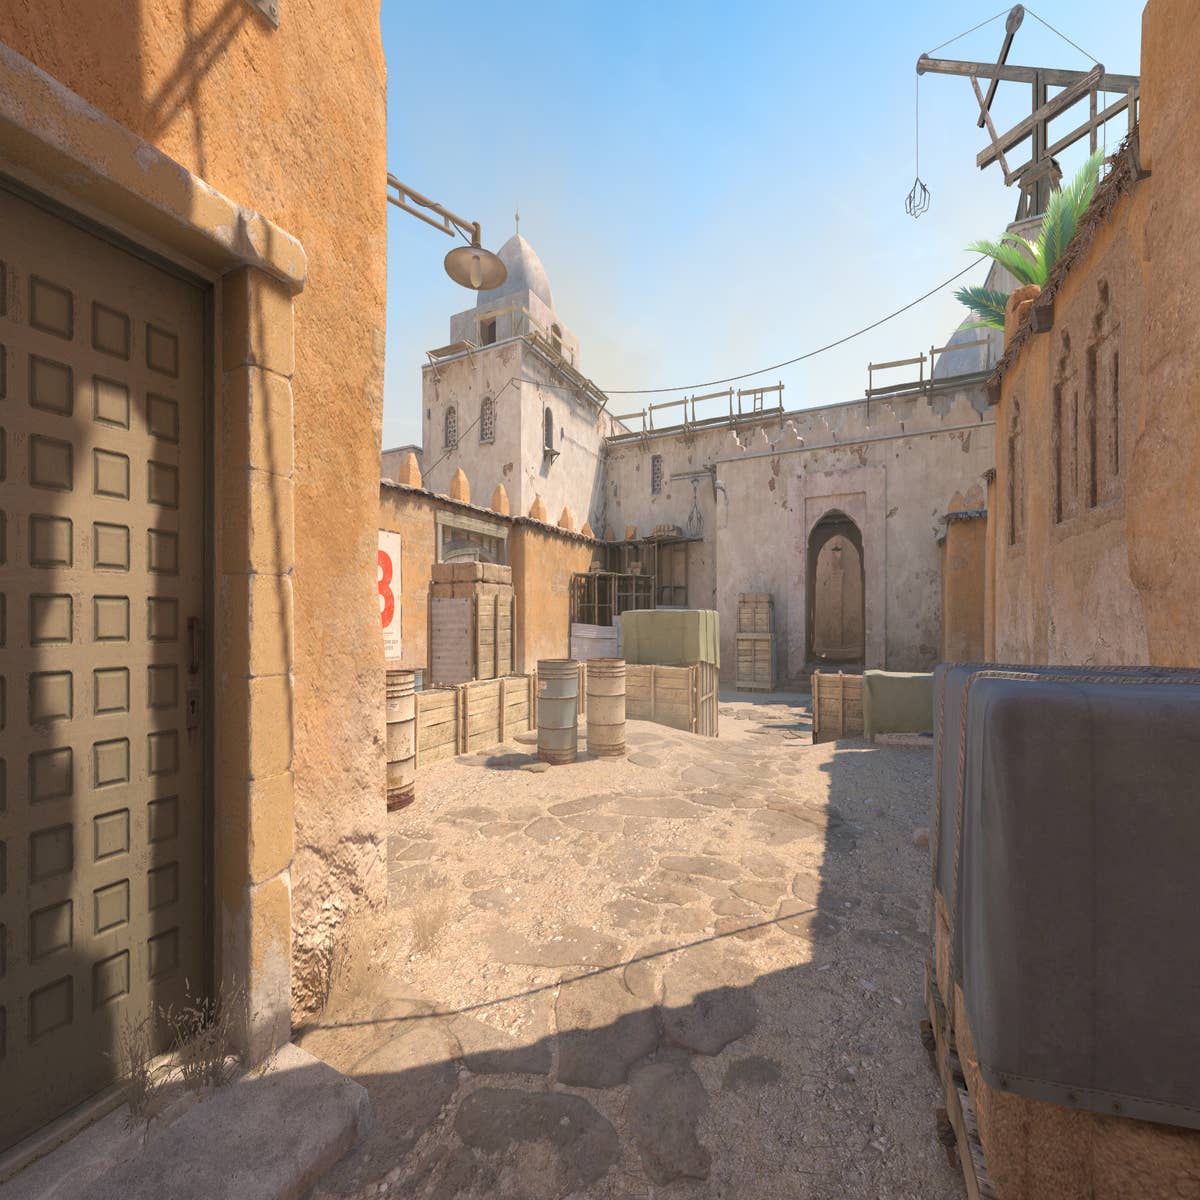 Counter Strike 2: Everything we know so far